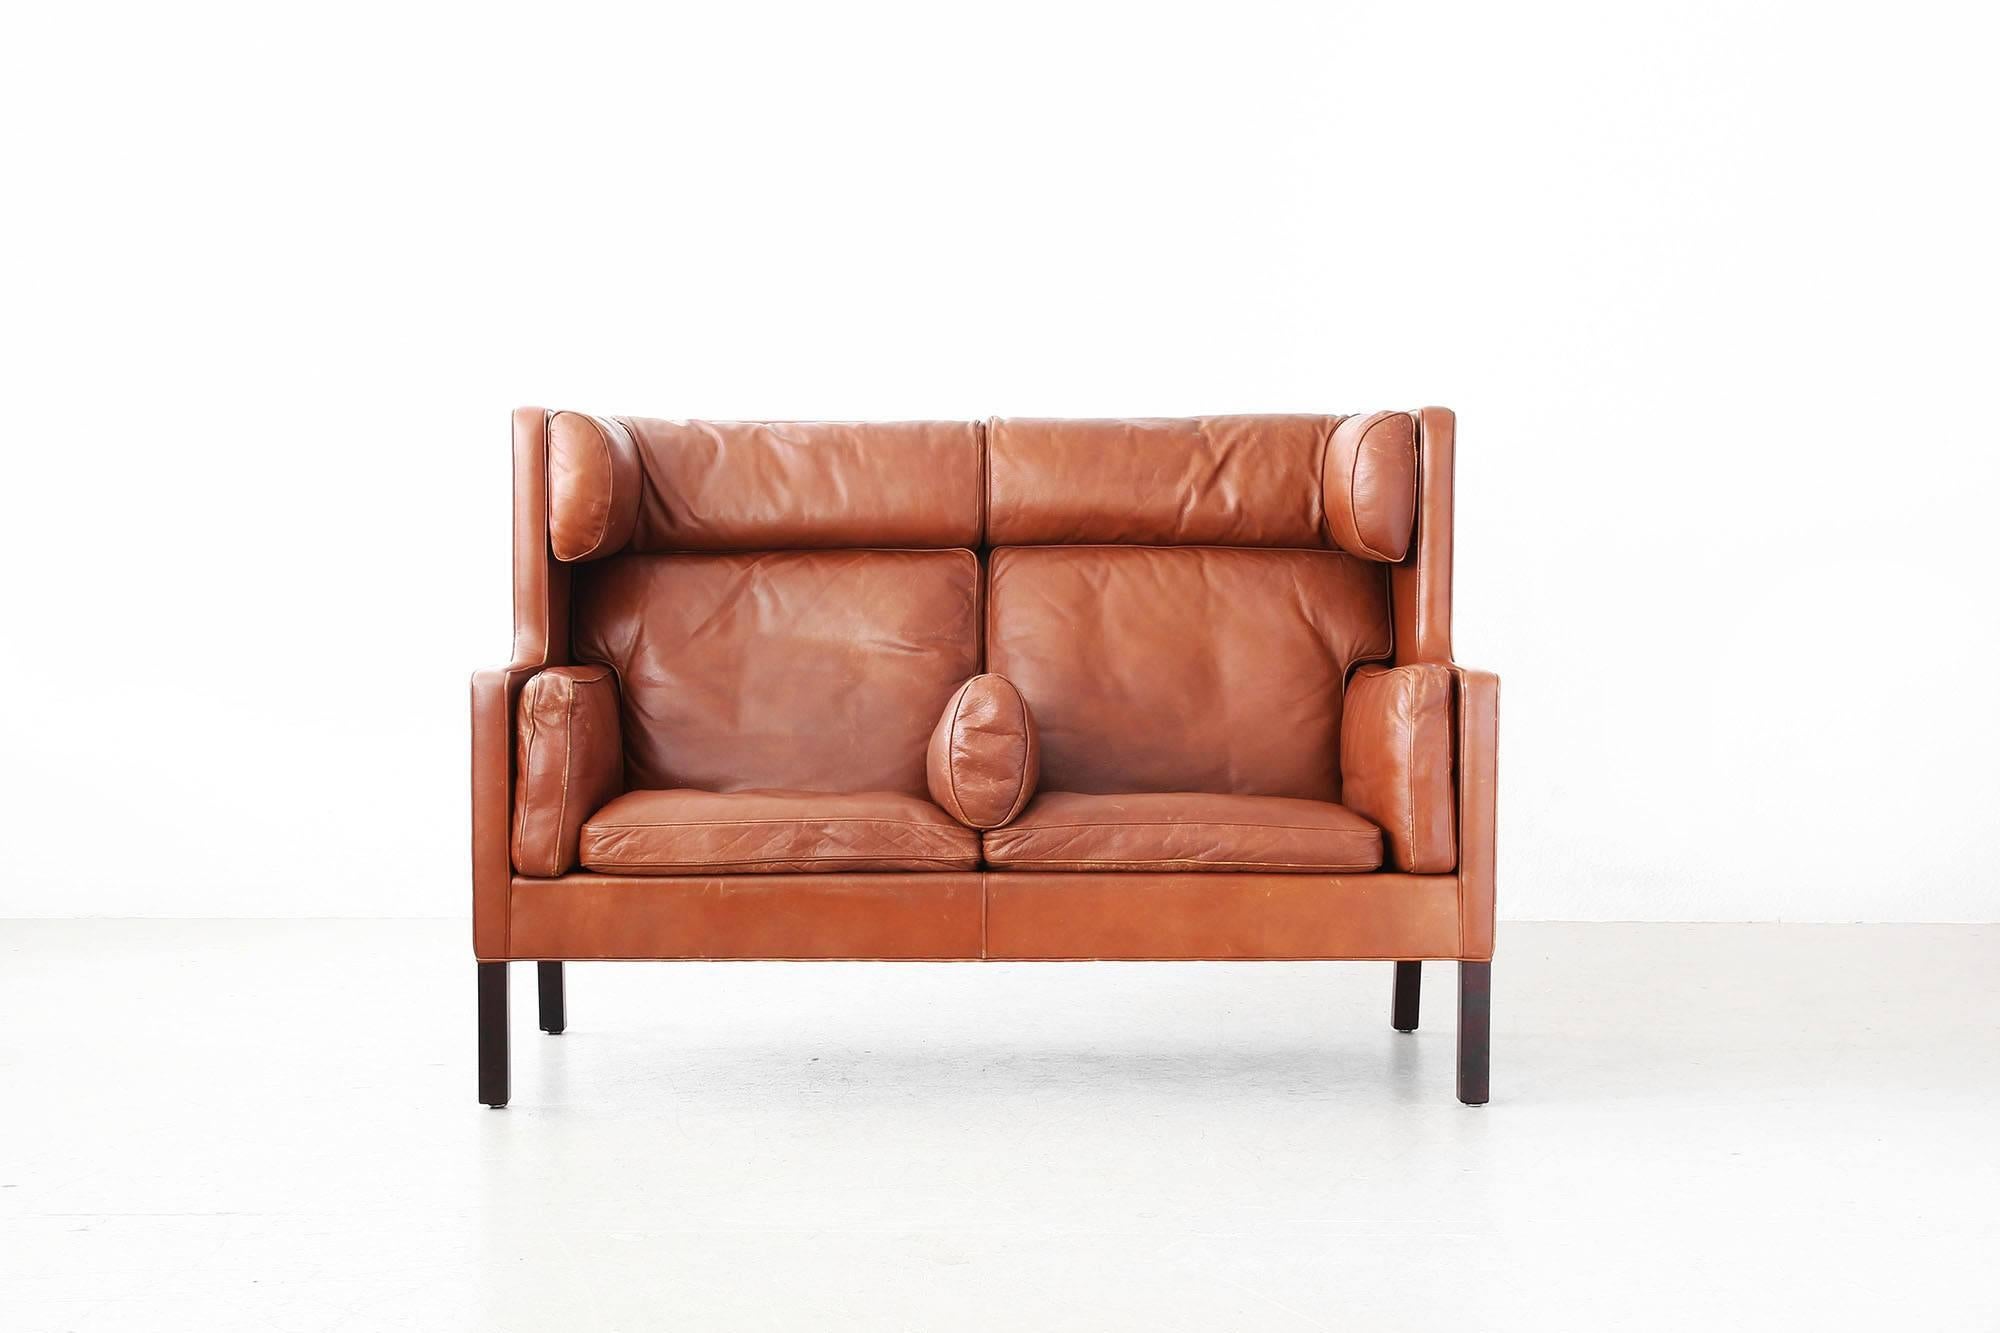 Beautiful "Coupe" sofa by Børge Mogensen for Fredericia.
The sofa is in a very good condition with just little signs of use. The cushions are made of brown leather and are filled with down feathers. Labeled with "Fredericia